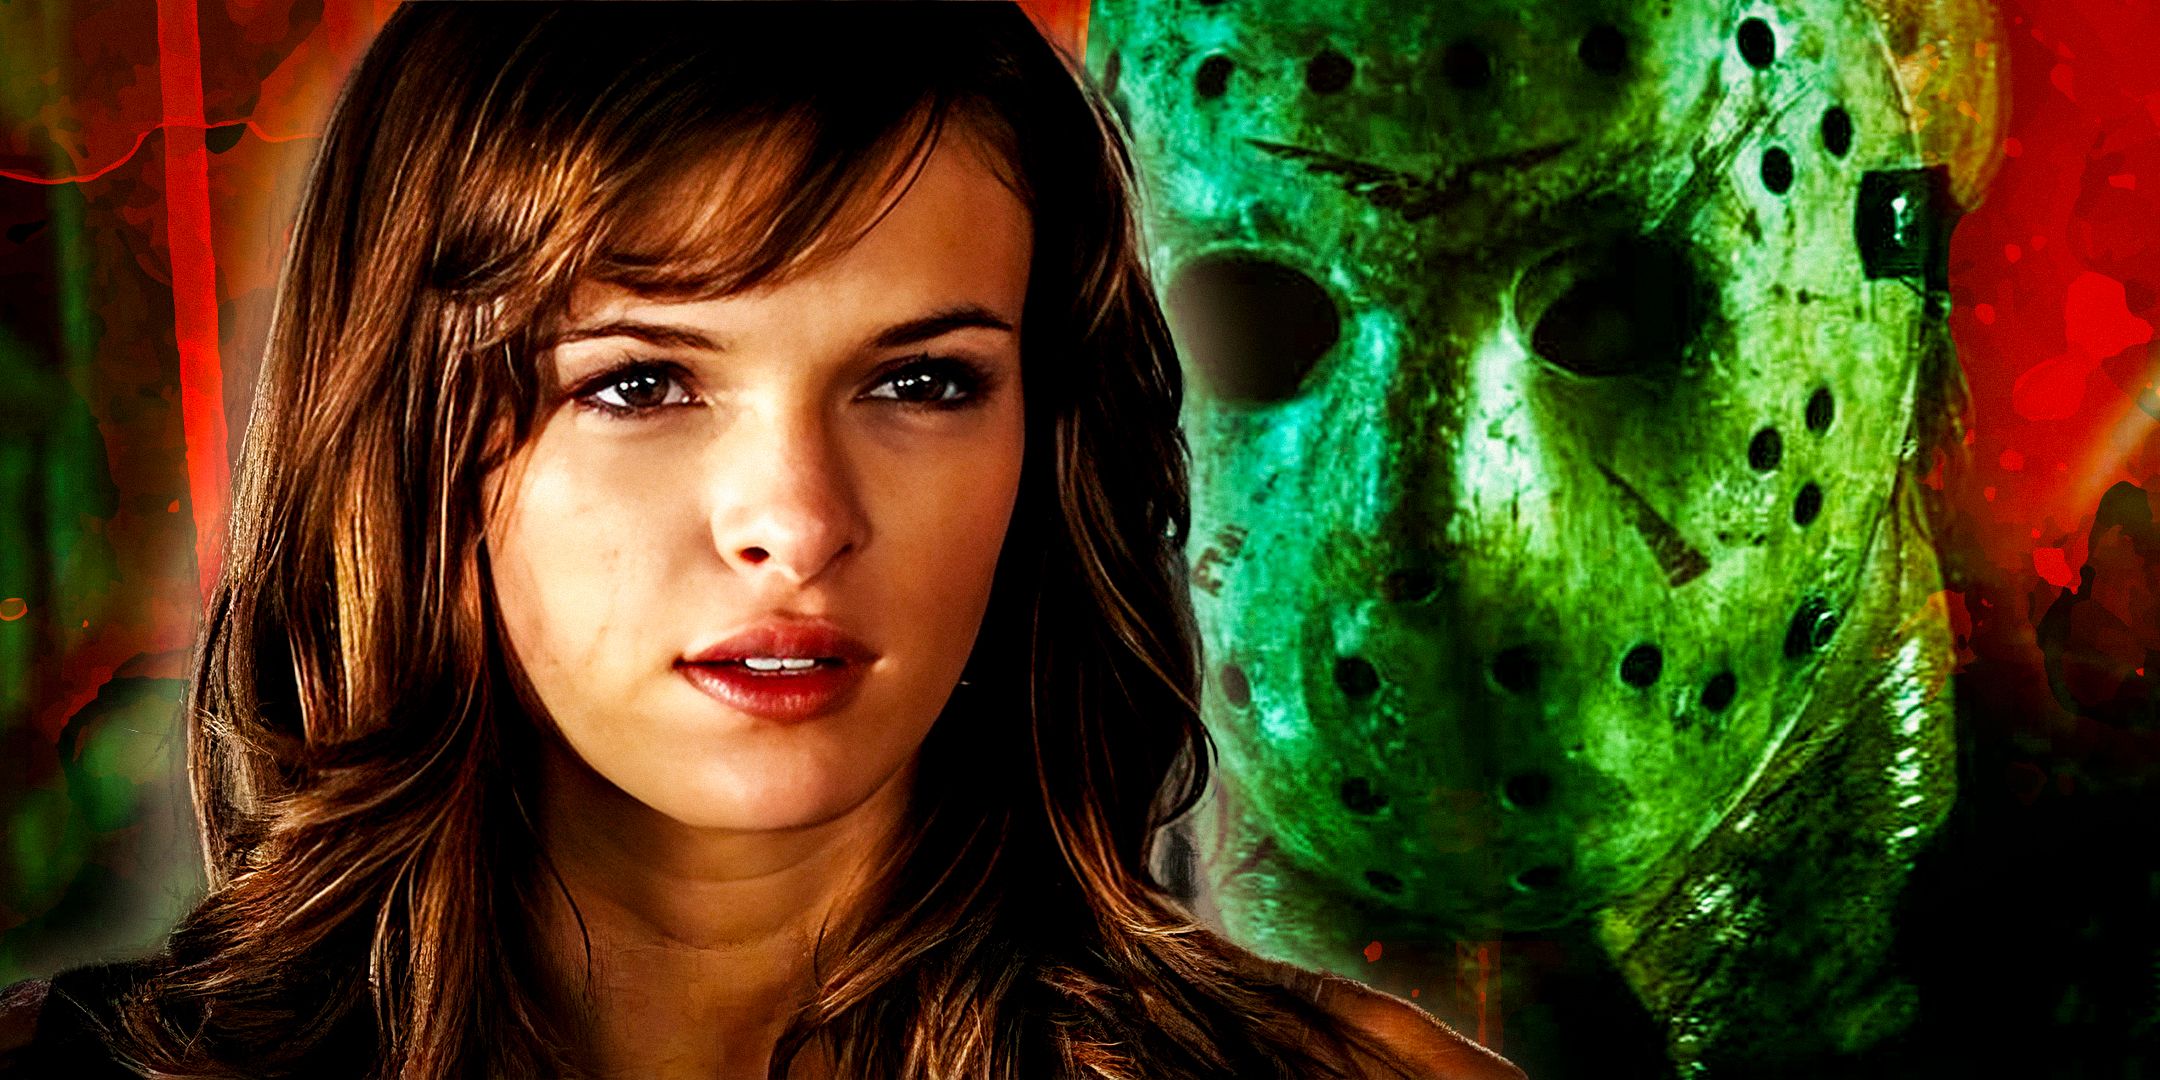 Danielle Panabaker as Jenna and Jason Voorhees in Friday the 13th 2009